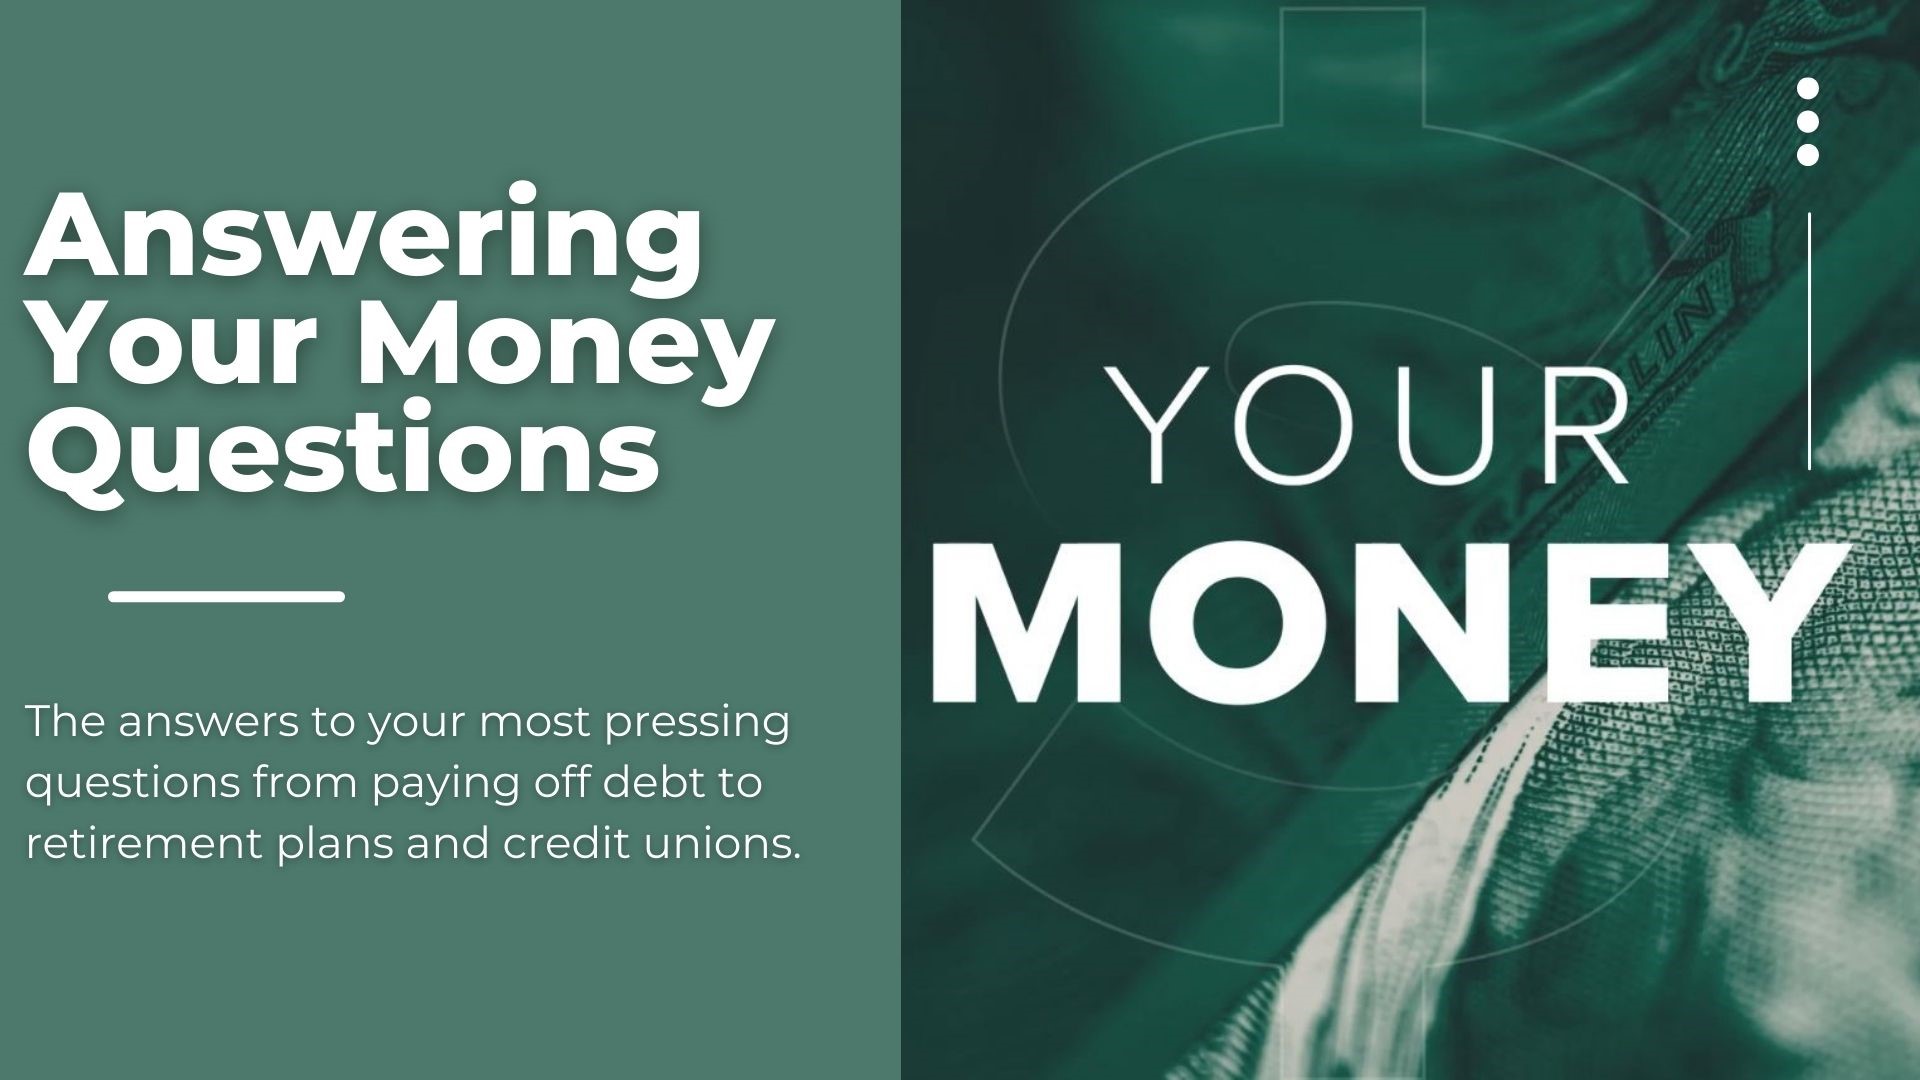 Financial experts answer your most pressing money questions from mortgage fees and credit scores to retirement plans and credit unions.